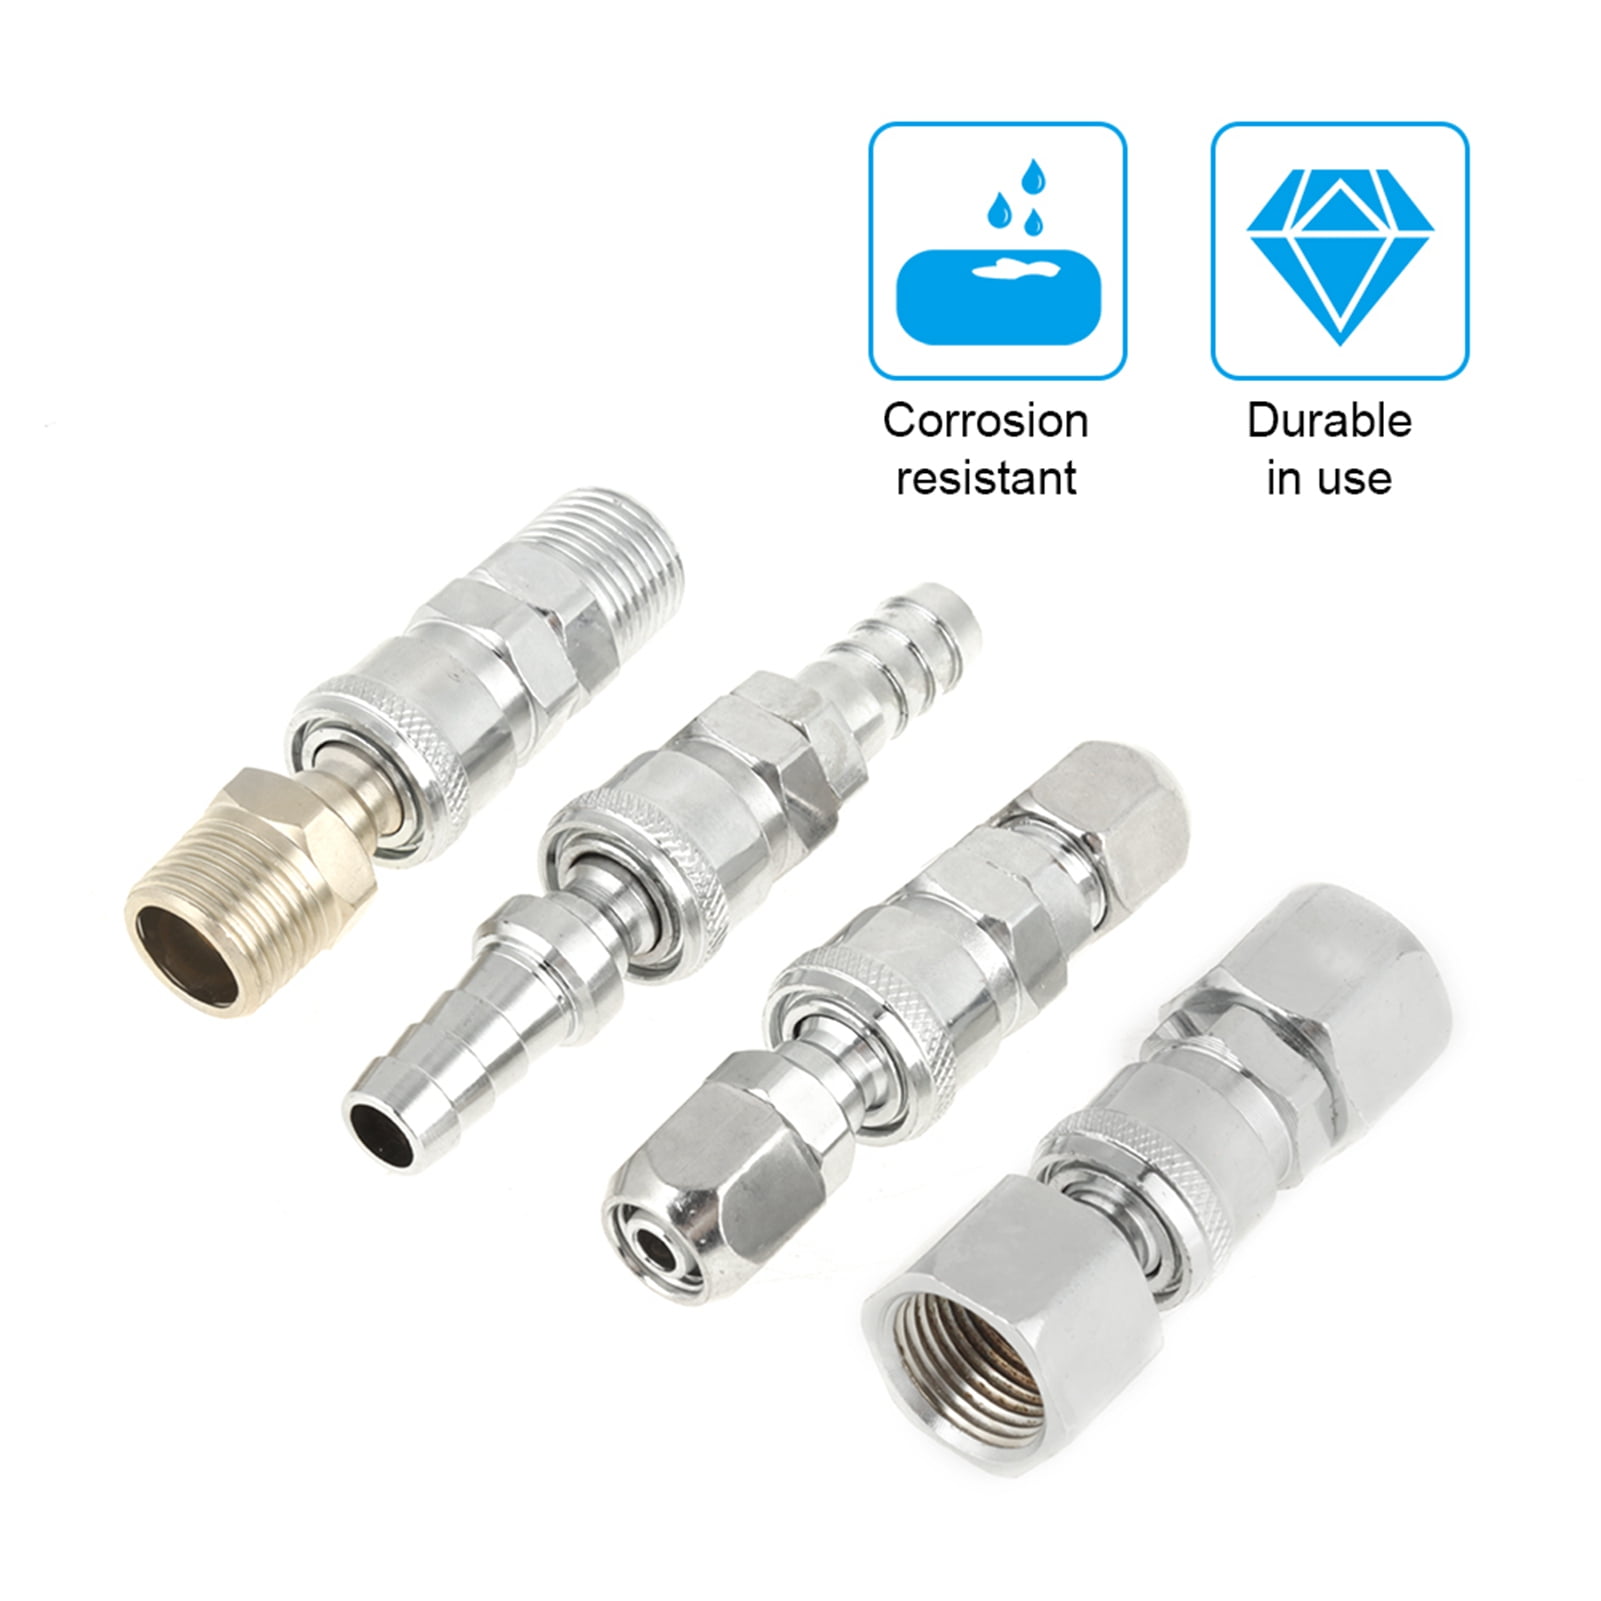 8PCS BSP 1/2 Hose Connector,Air Compressor Hose Fitting,Coupler Socket  Connector Set,Resist Rust, Resistant,for Pneumatic Tool, Auto Industry, Air